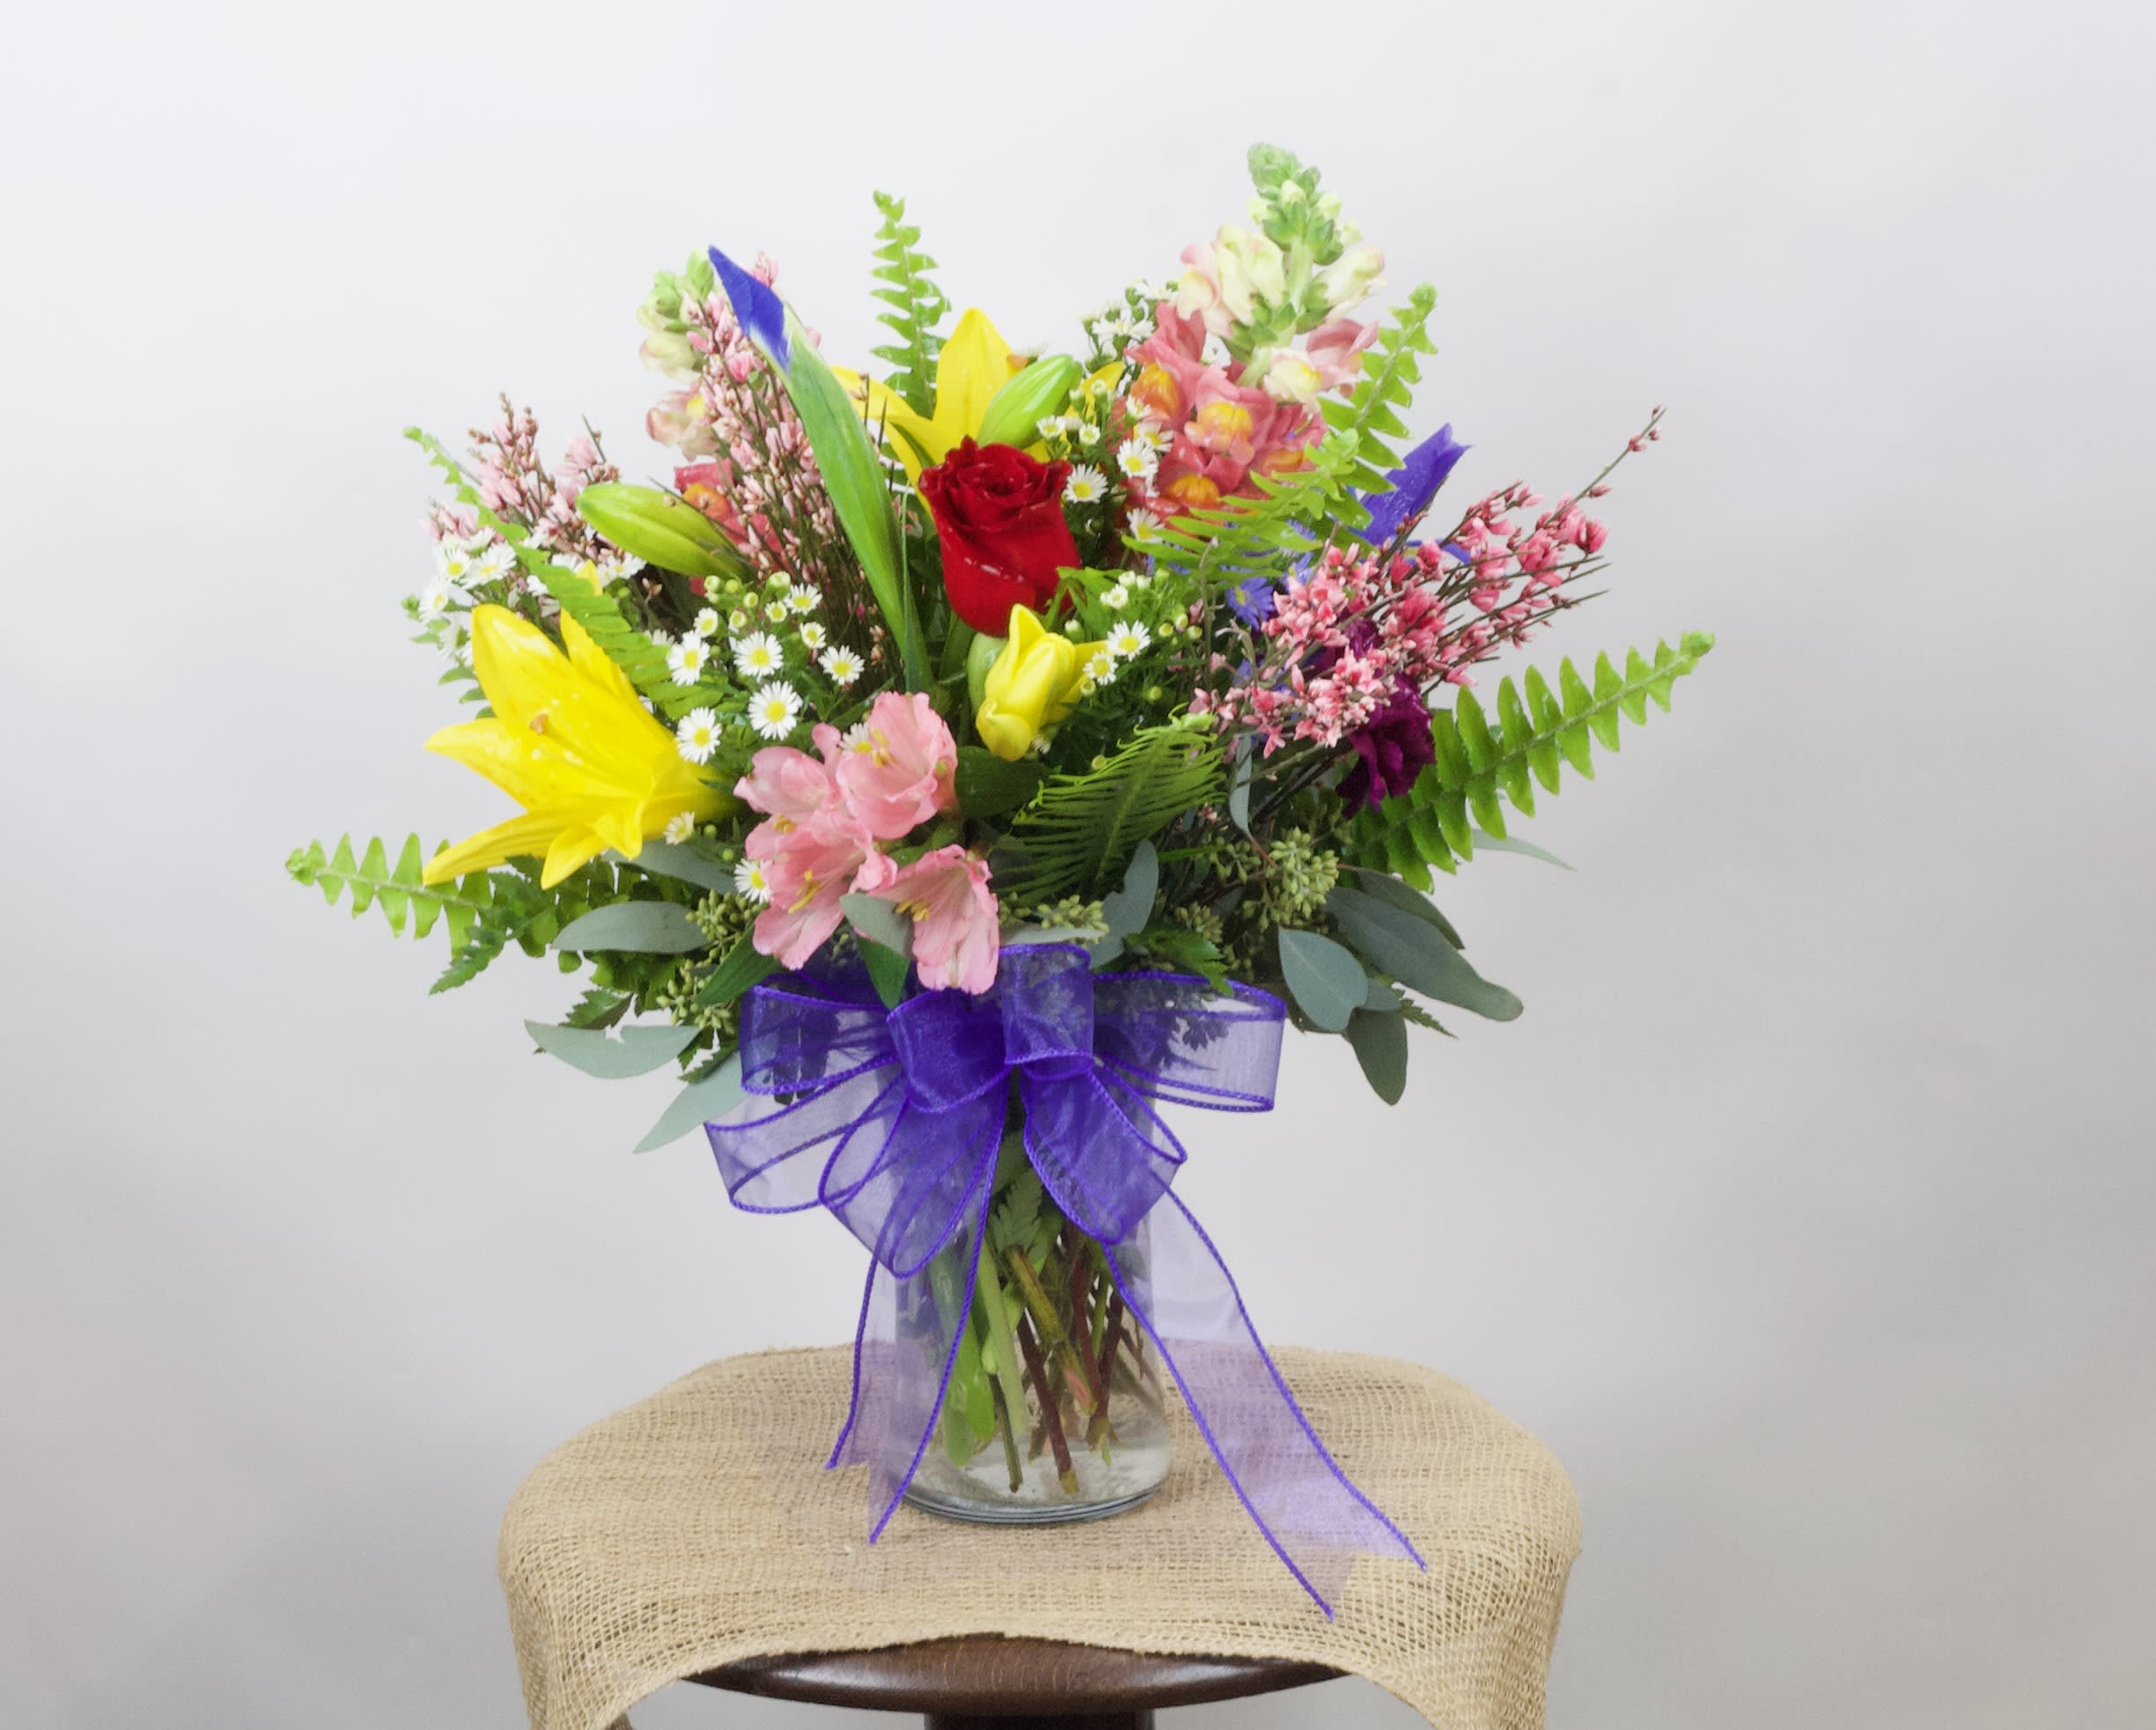 Cutie Pie - Mixed arrangement with lilies, stock, roses, and more.